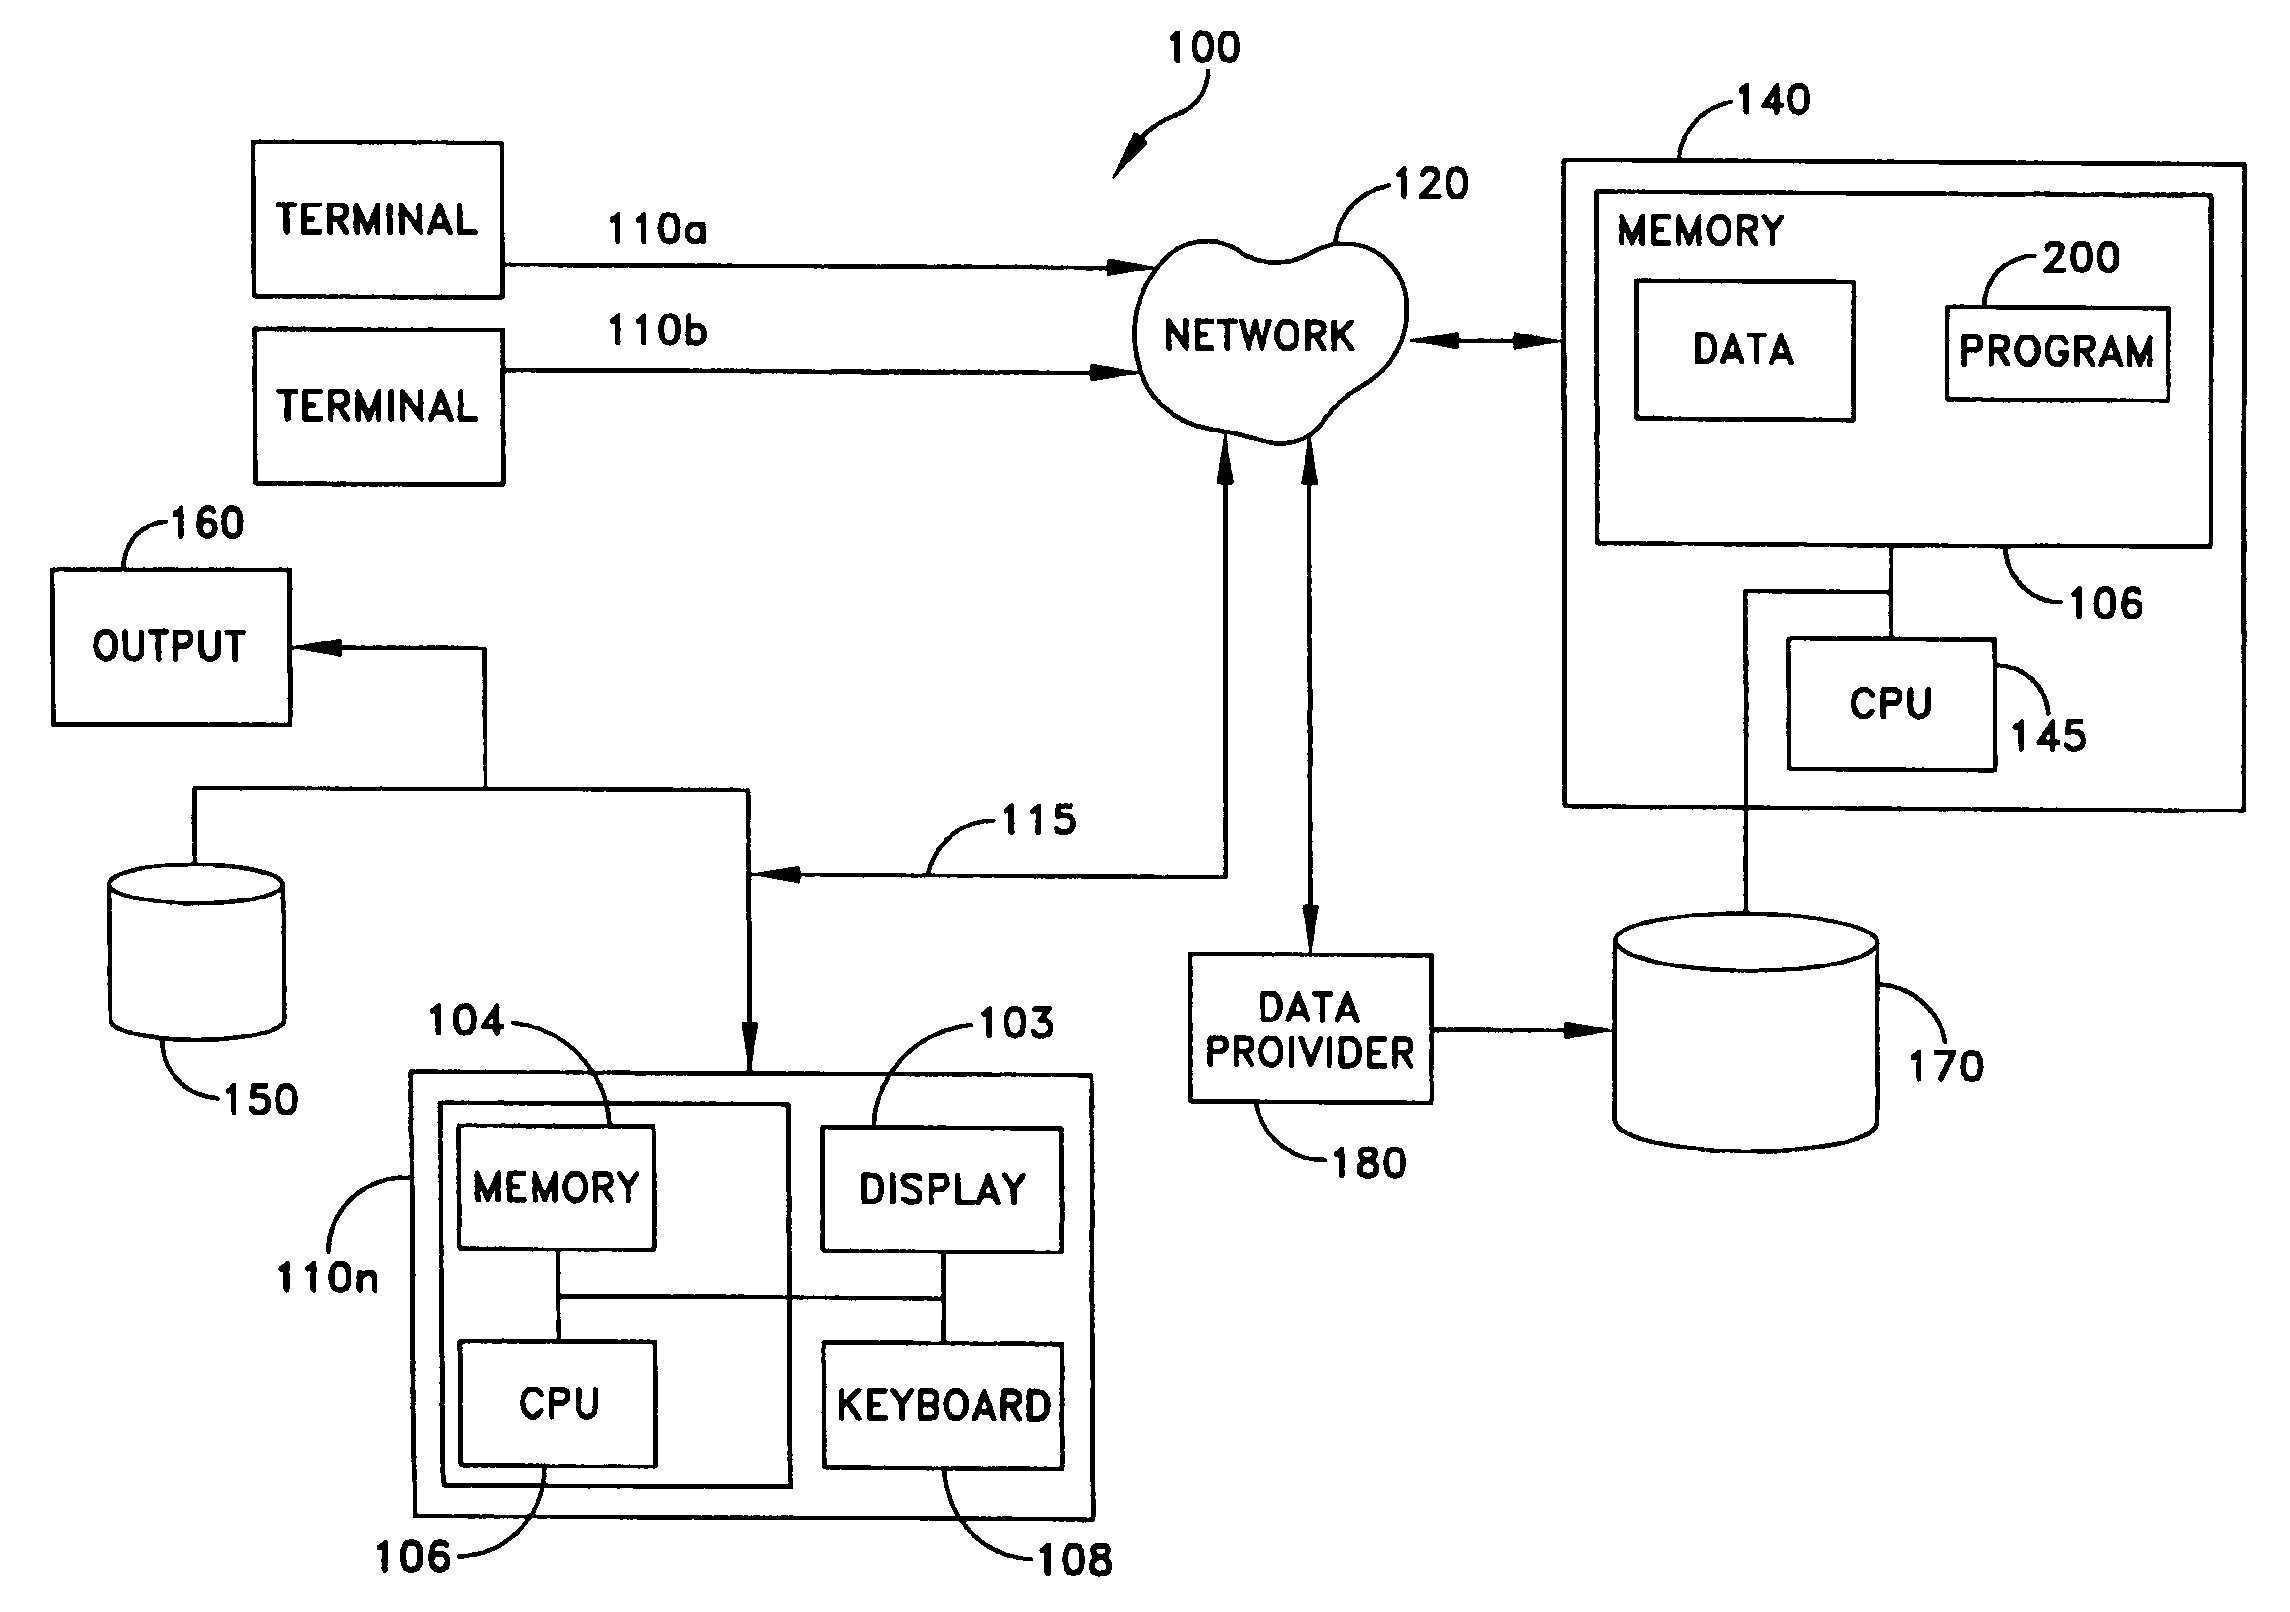 Method and system for classifying documents